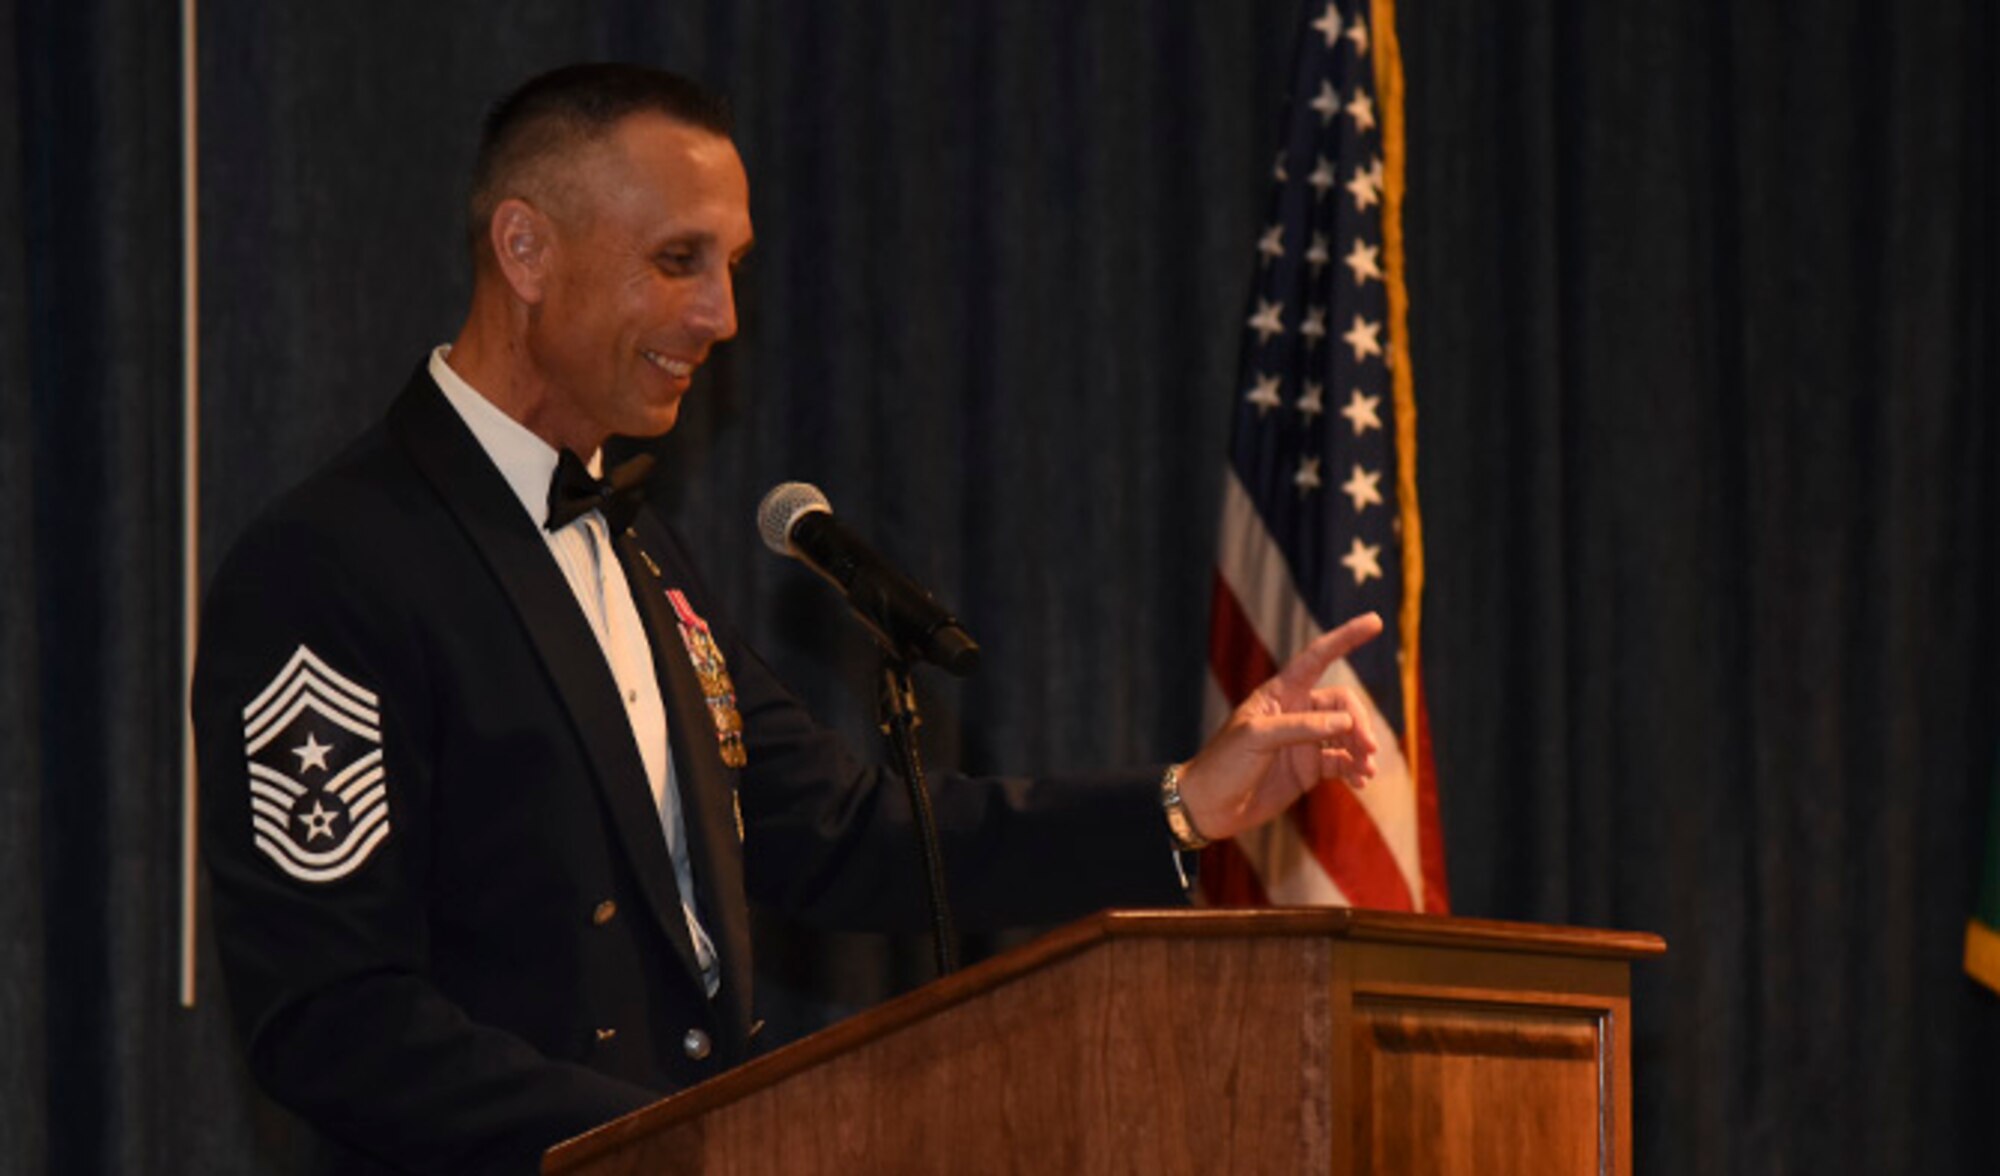 Chief Master Sgt. Todd Petzel, 18th Air Force command chief, delivers a speech during the Senior NCO Recognition Ceremony at the Red Morgan Center July 29. Petzel was joined by Col. Ryan Samuelson, 92nd Air Refueling Wing commander, and Chief Master Sgt. Bill Fitch, 92nd ARW acting command chief, in congratulating Fairchild’s newest selectees. (U.S. Air Force photo/Airman 1st Class Mackenzie Richardson)